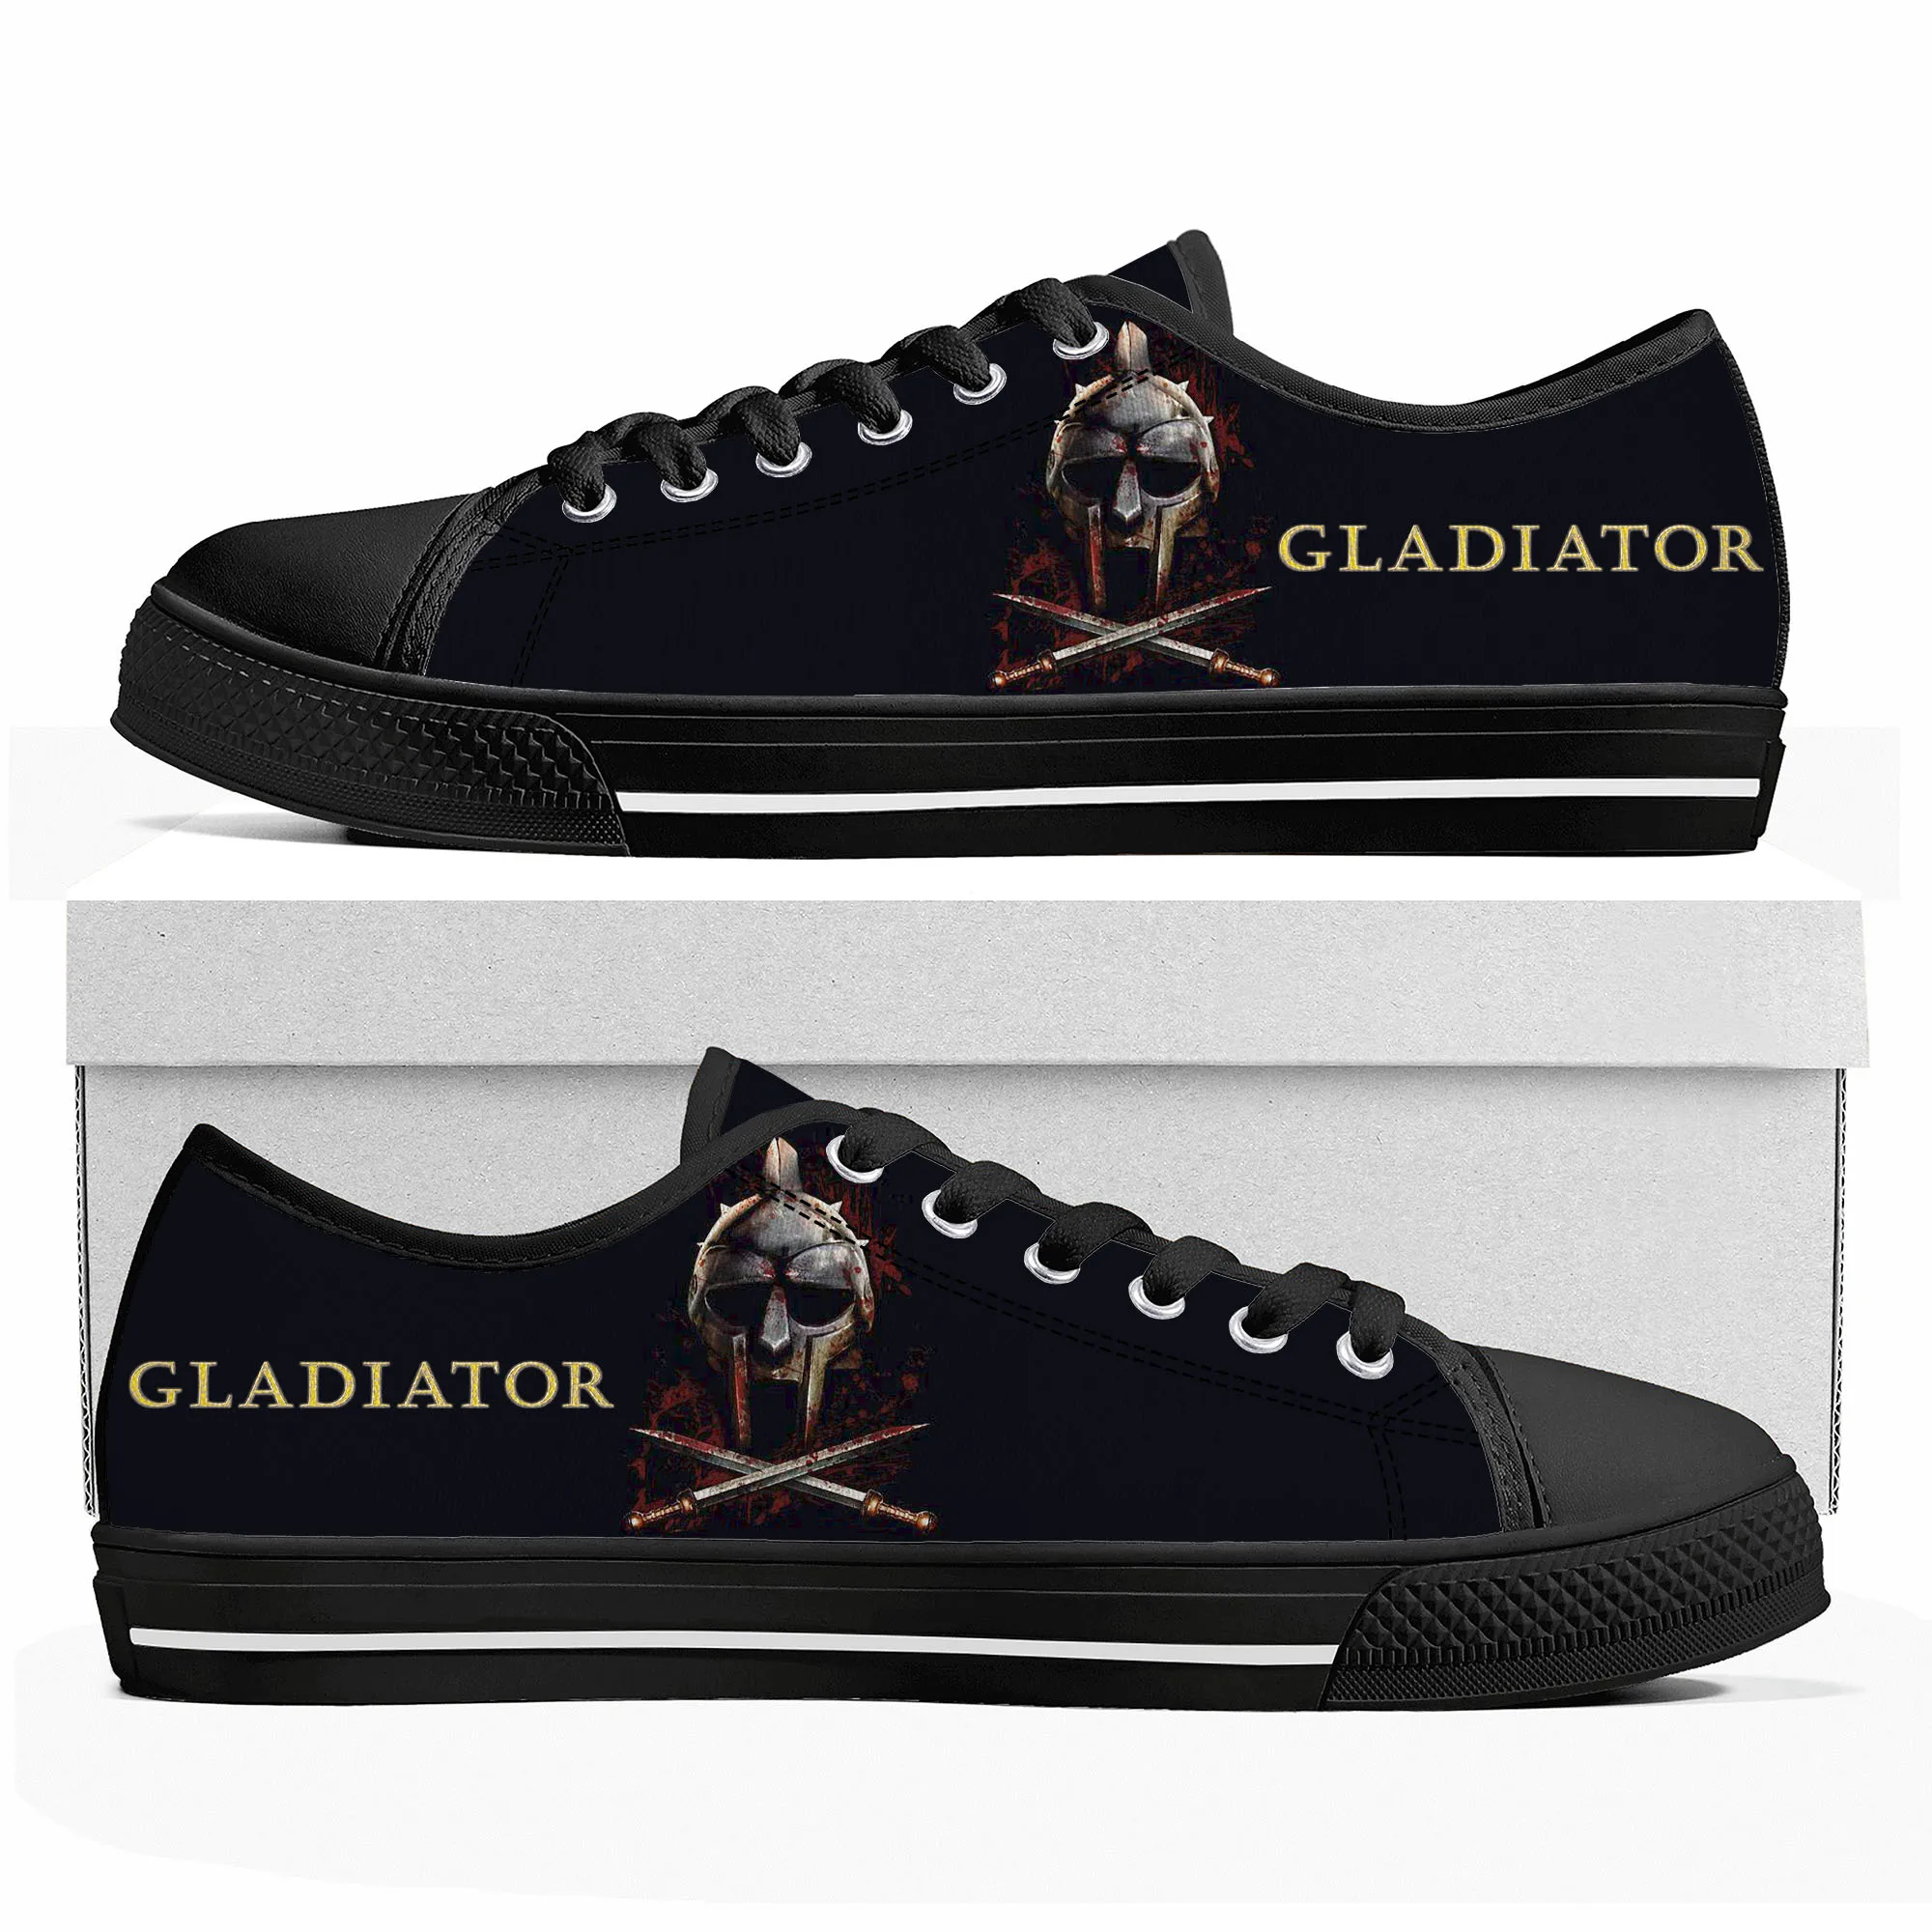 

Gladiator Low Top Sneakers Mens Womens Teenager High Quality Russell Crowe Canvas Sneaker couple Casual Shoes Customize DIY Shoe